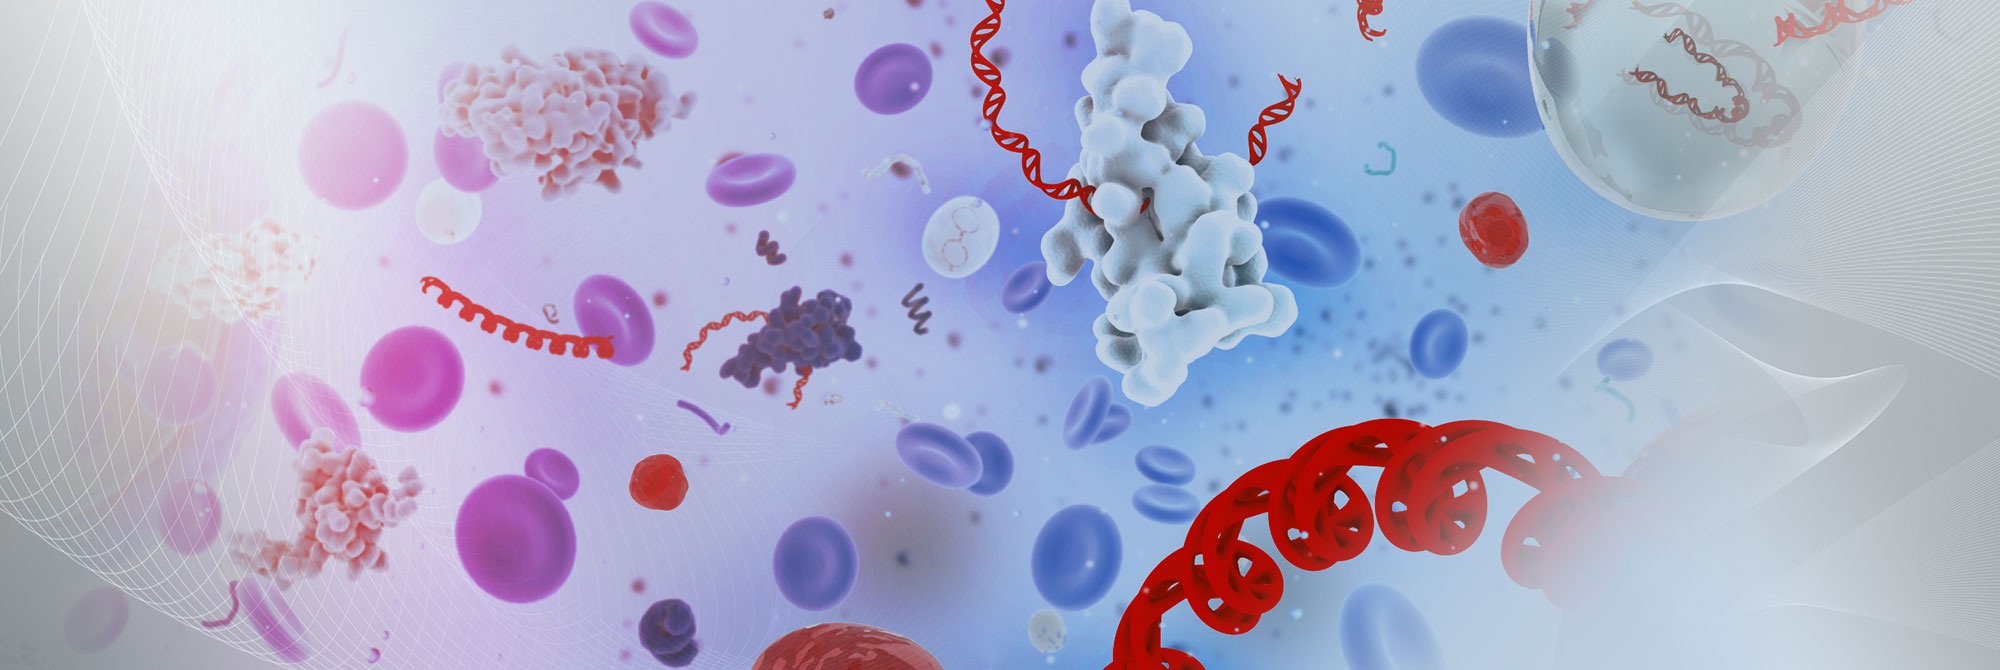 cell-free dna particles in bloodstream